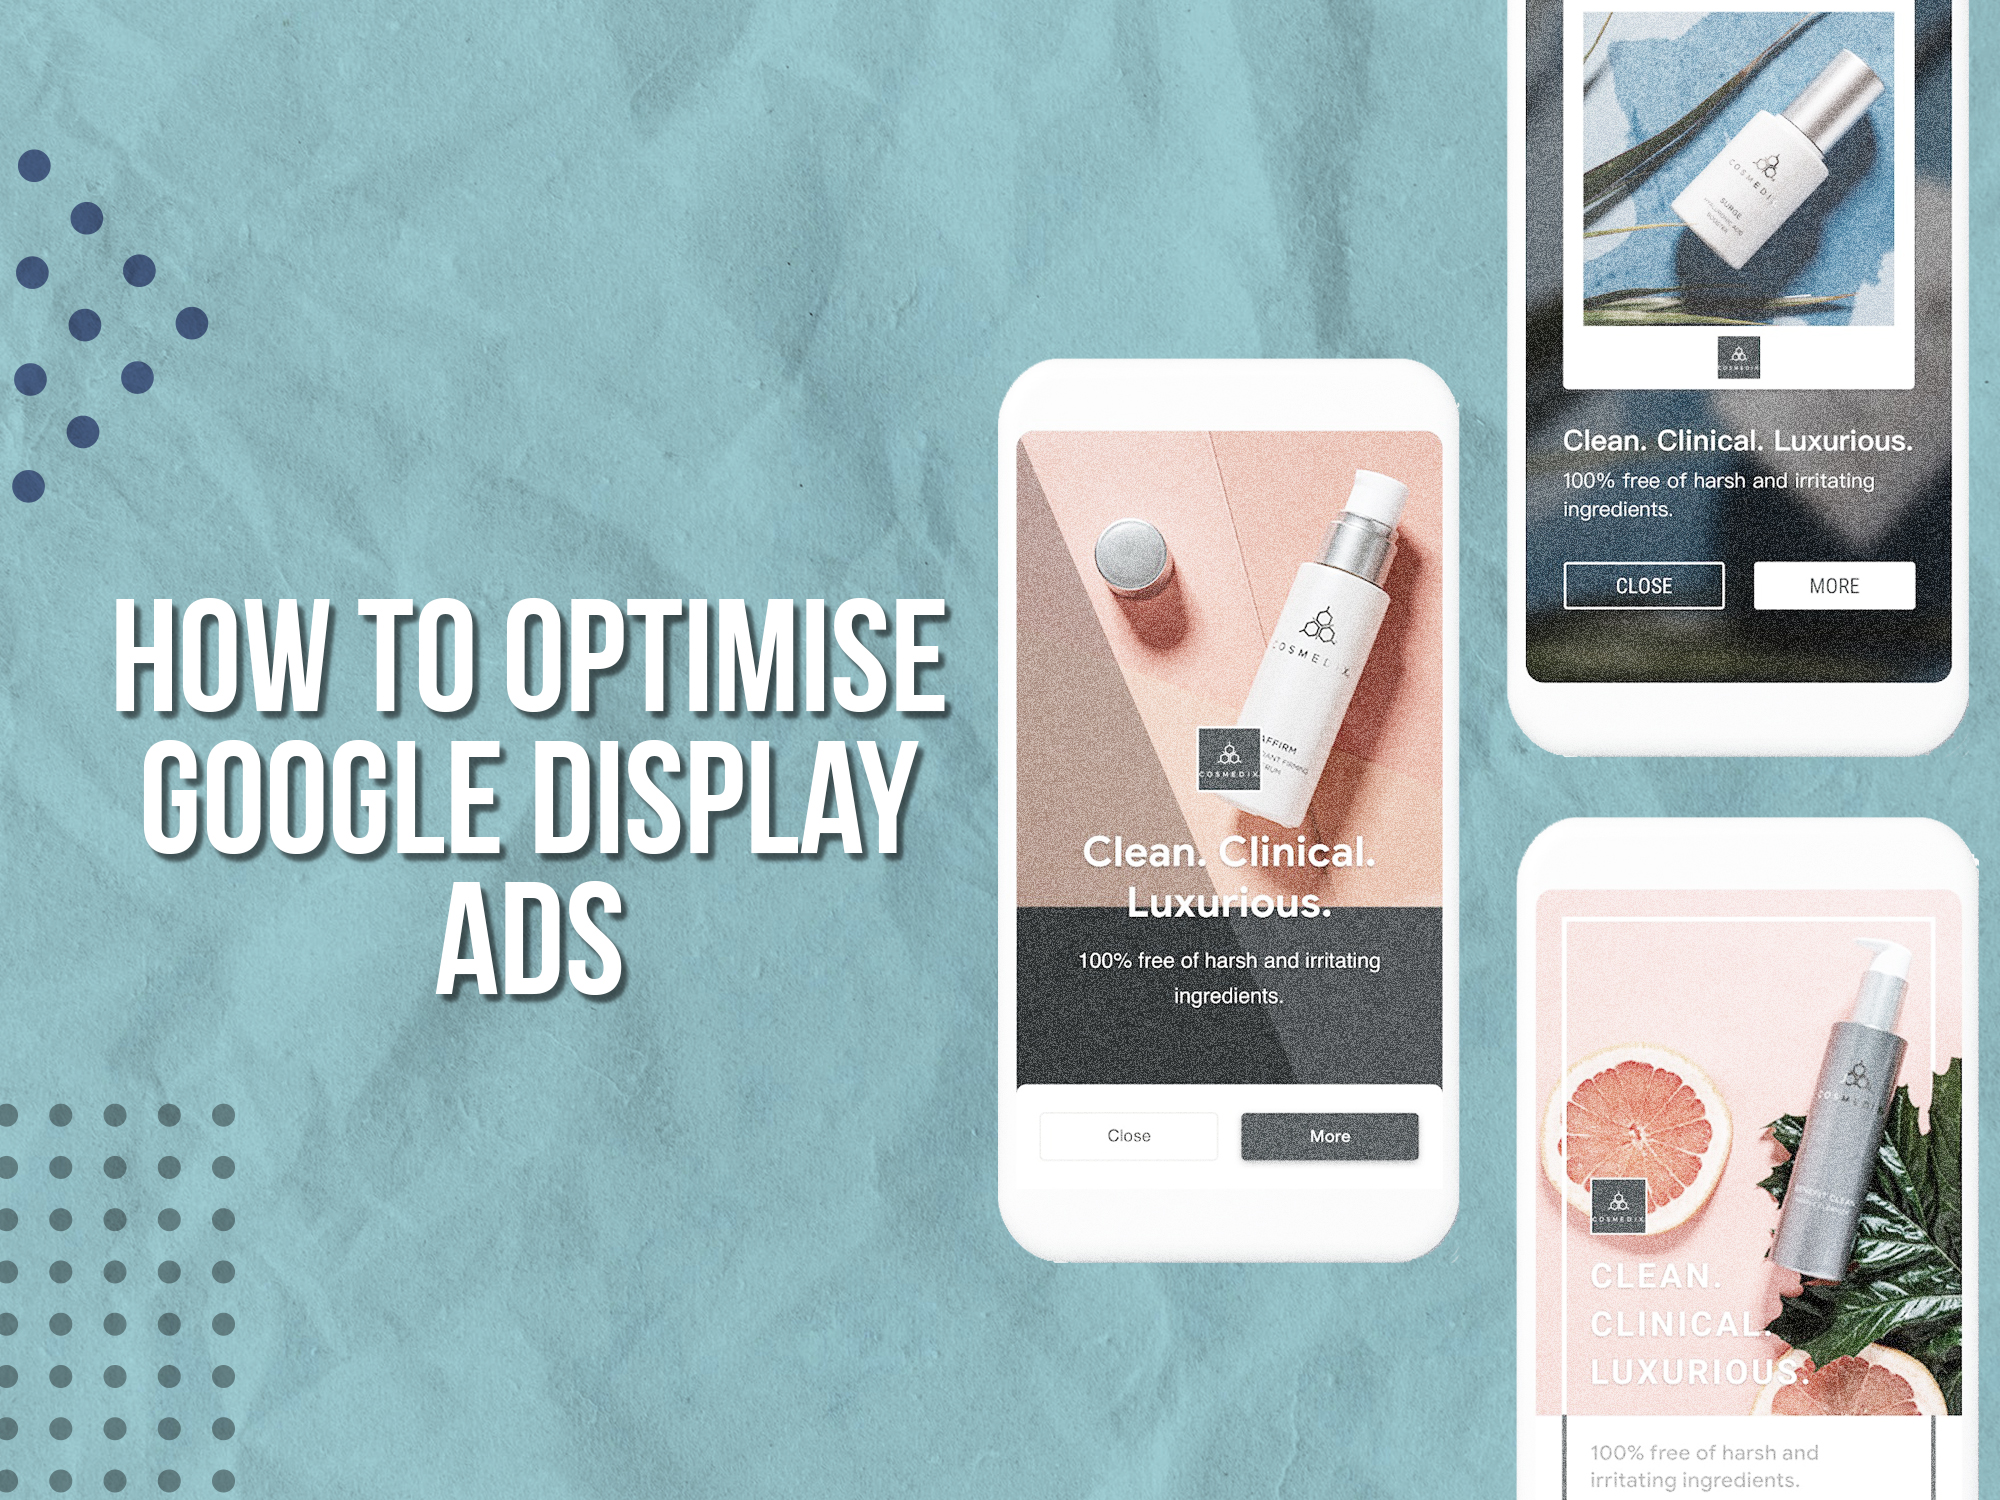 How to Optimise Google Display Ads